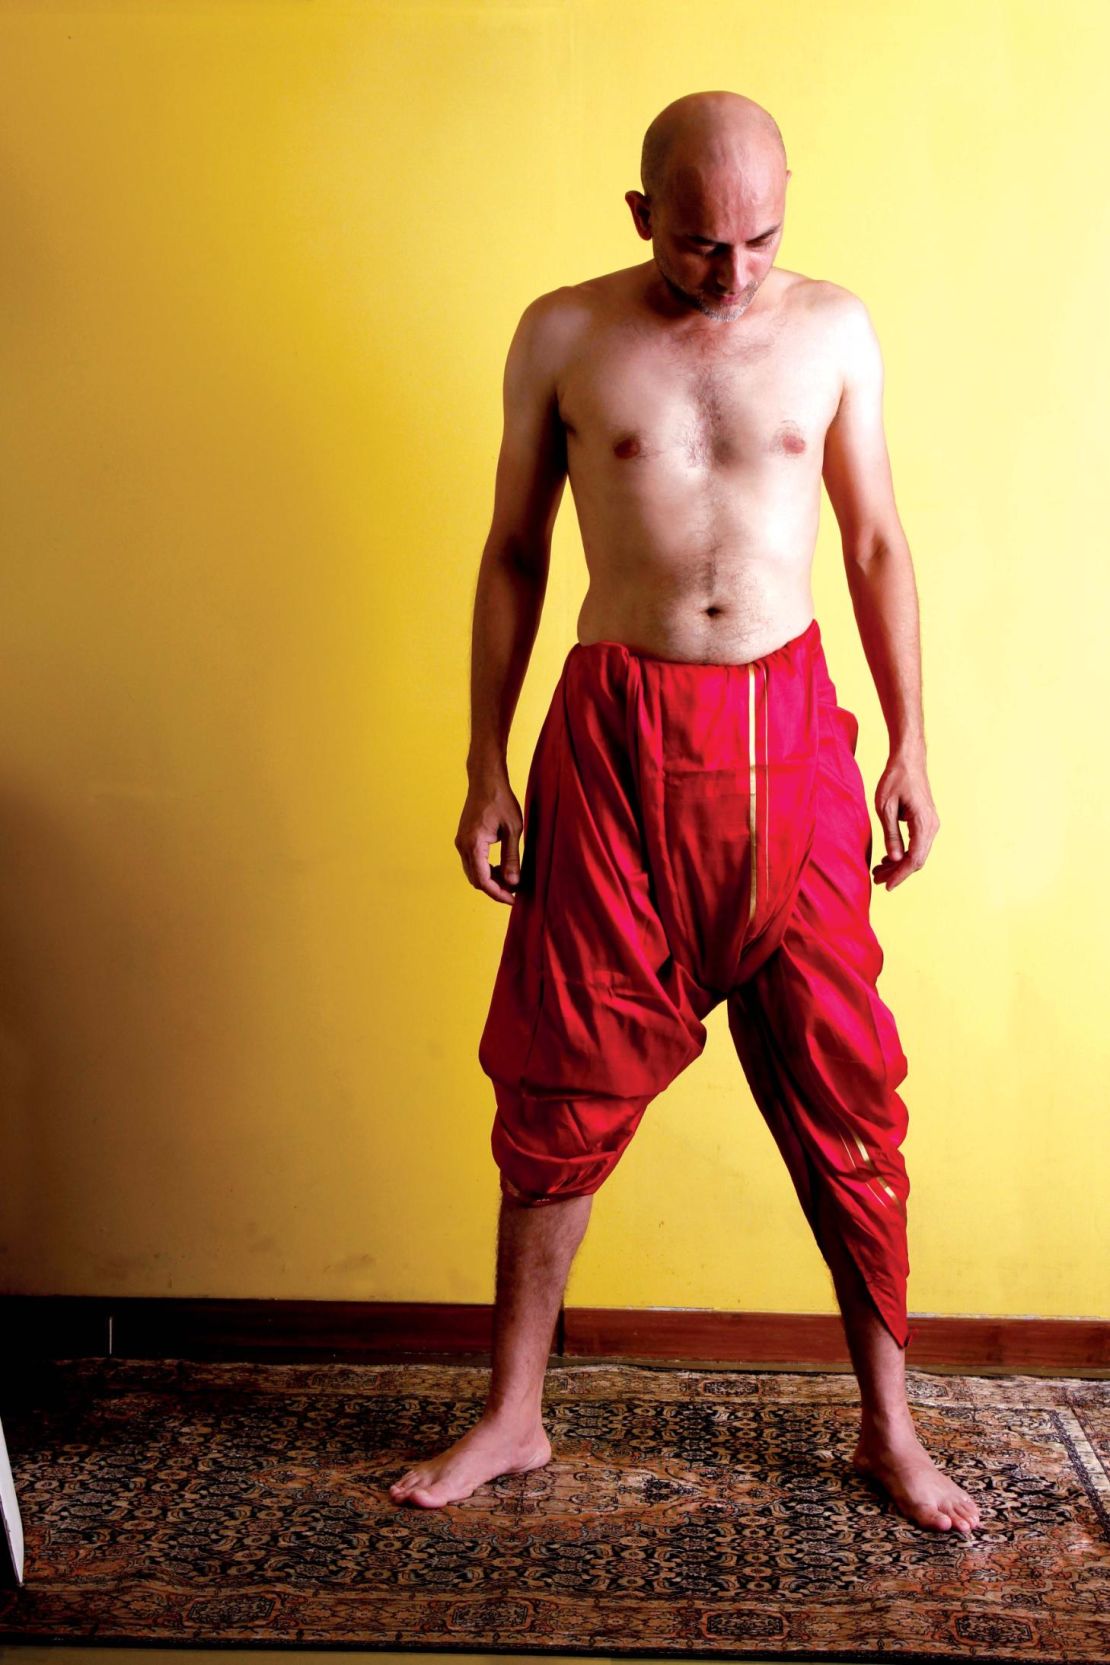 The dhoti can be wrapped around the body, creating pleats in the front to give it style. It was the most common lower garment worn by men in India, before the 19th century demanded more "cosmopolitan clothing."